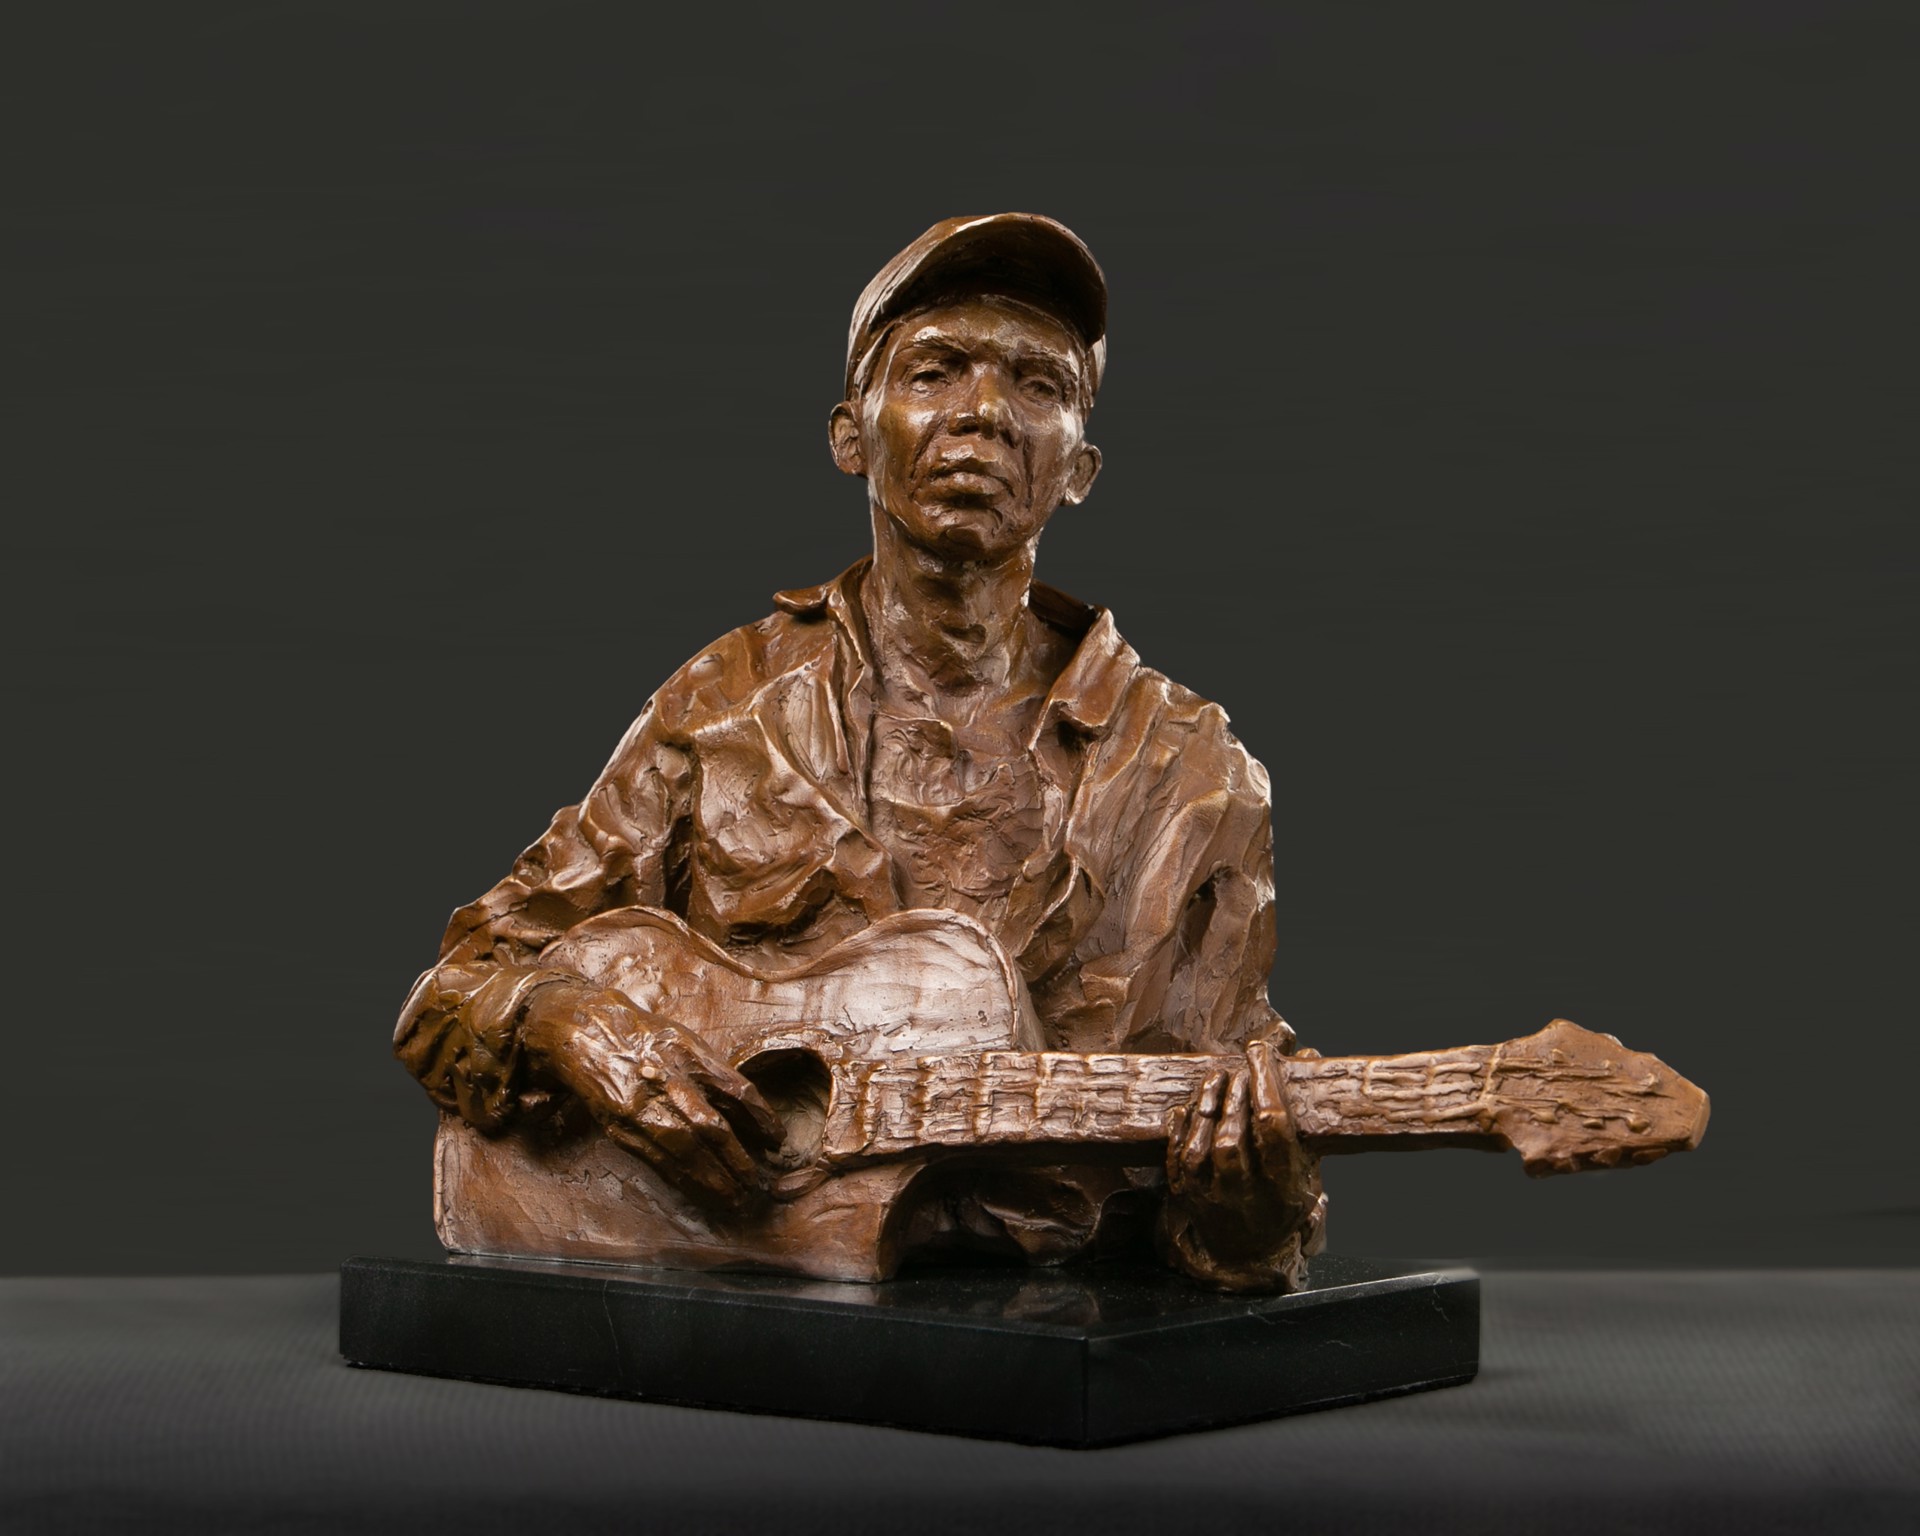 Blues Player by Susan Wakeen